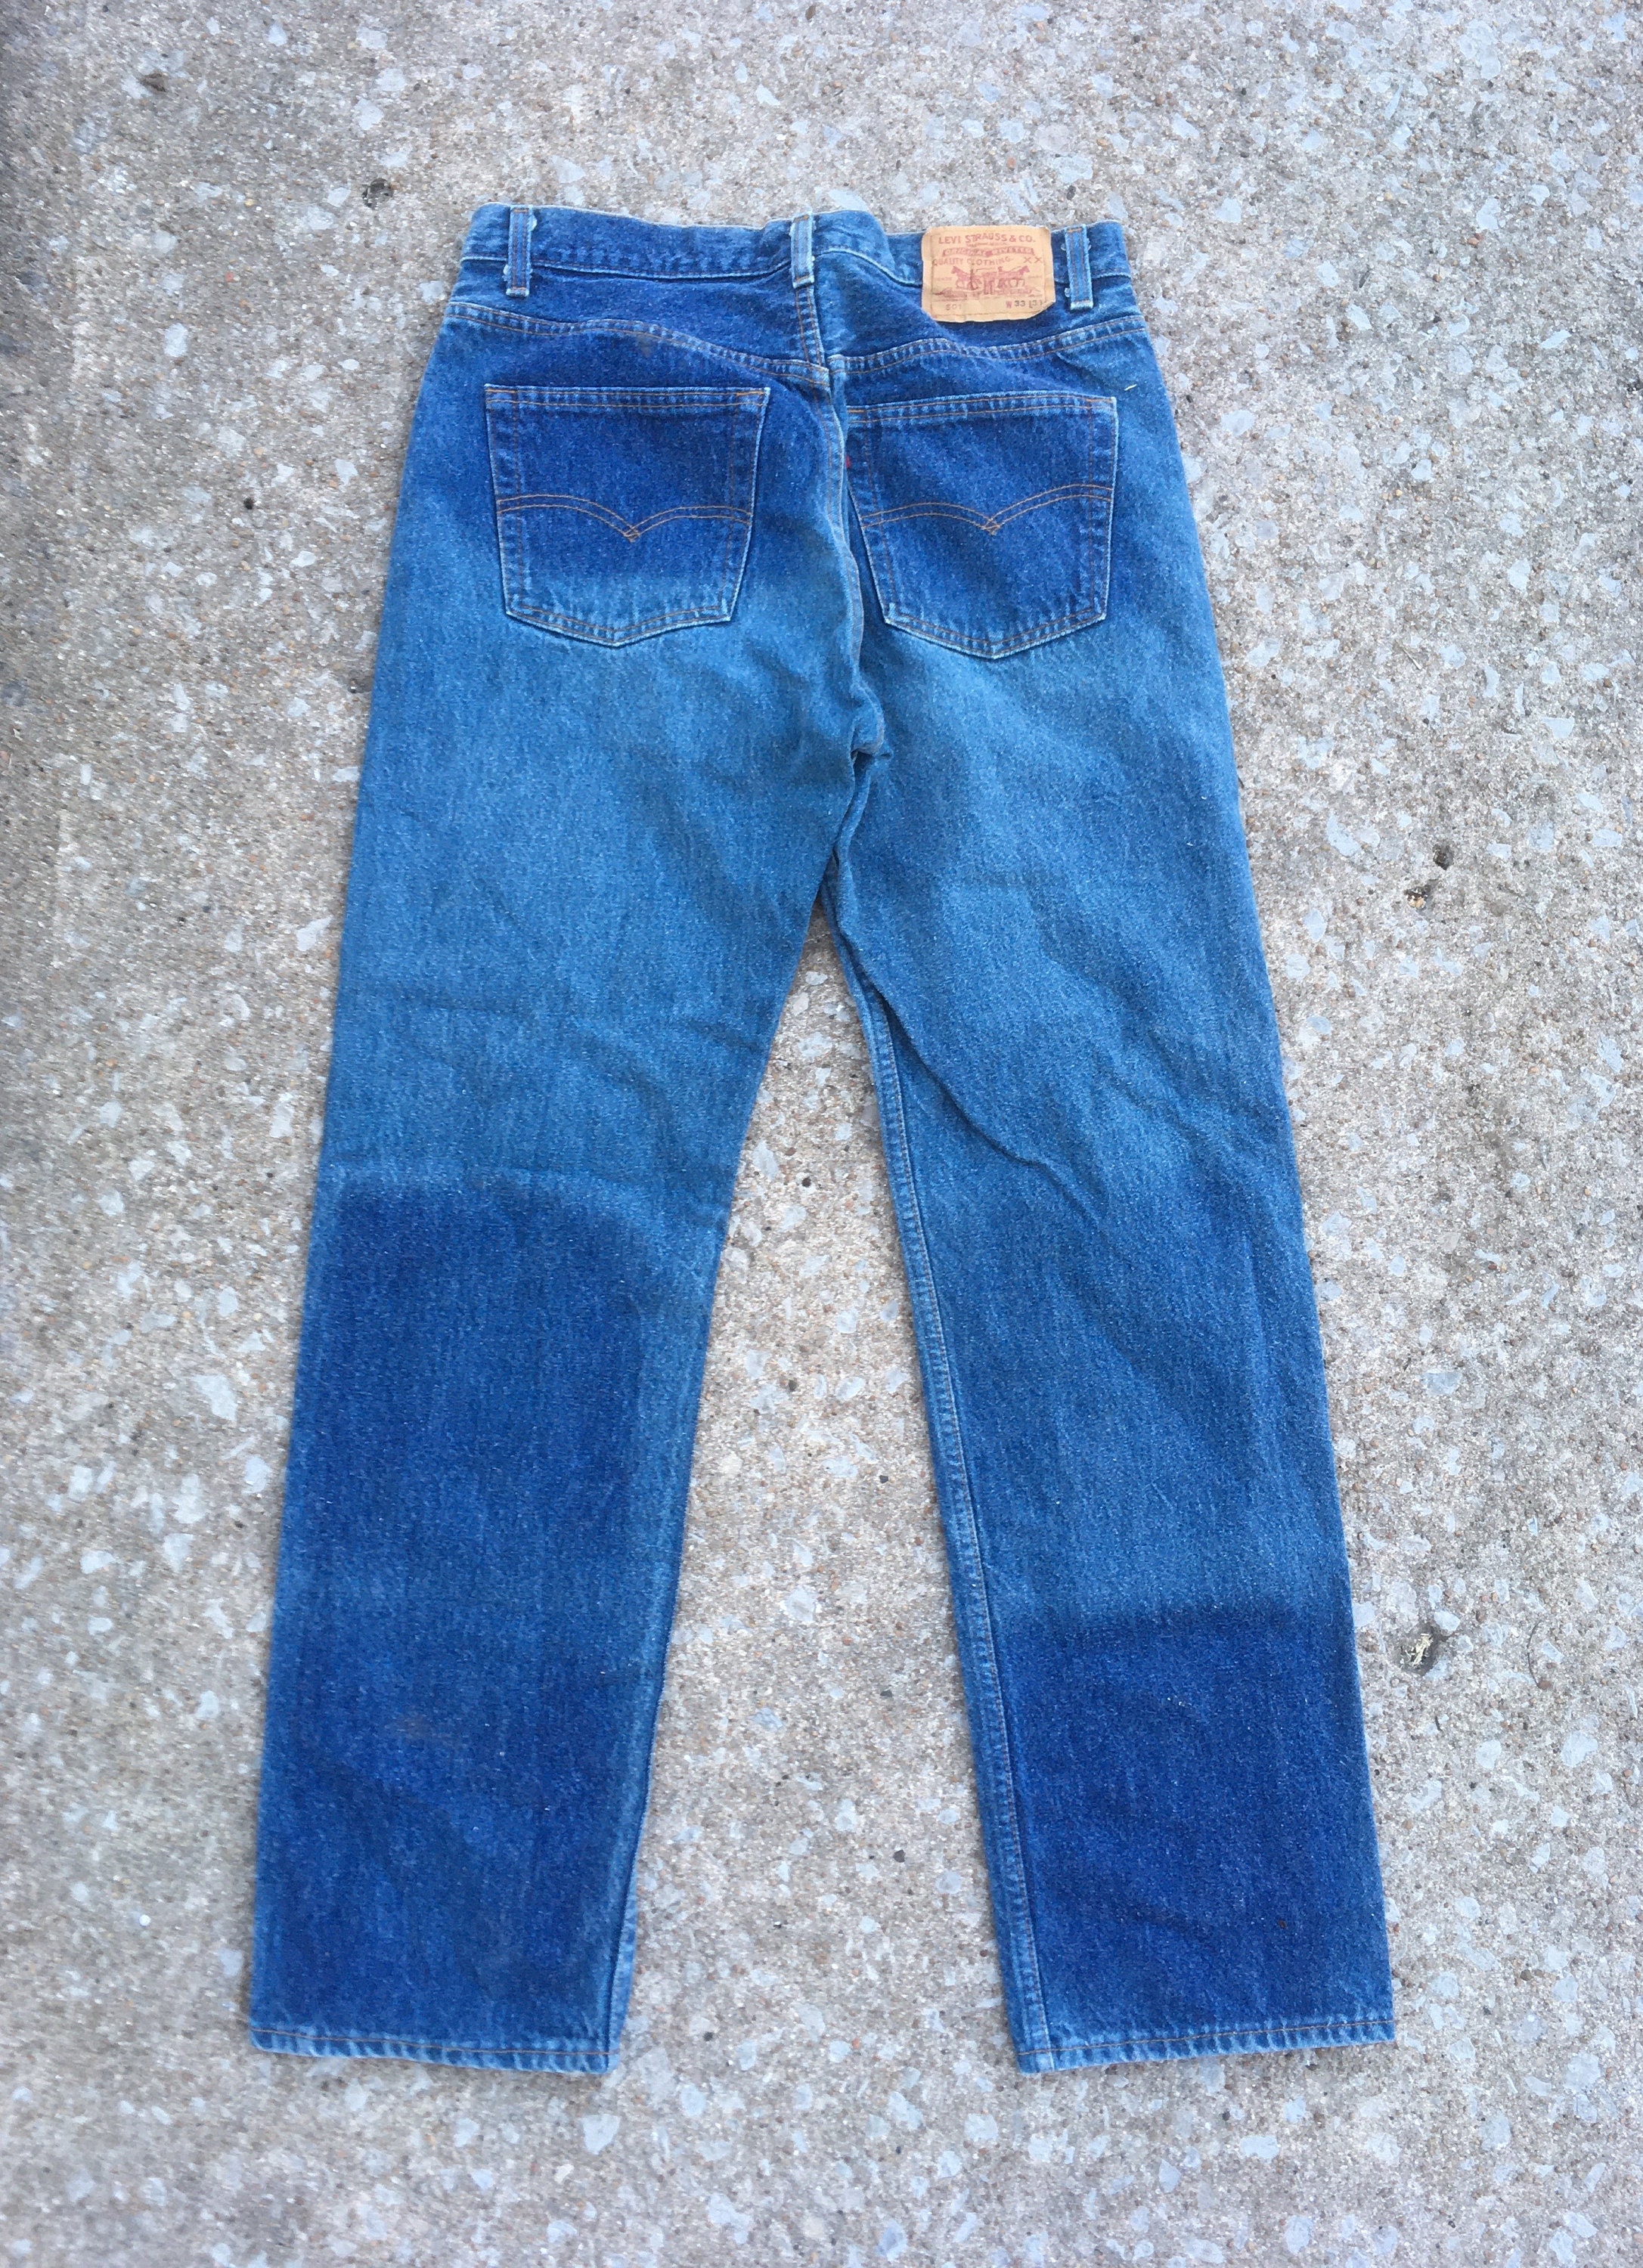 Vintage 1980s LEVIS 501 Faded Distressed Shrink to Fit Made in | Etsy